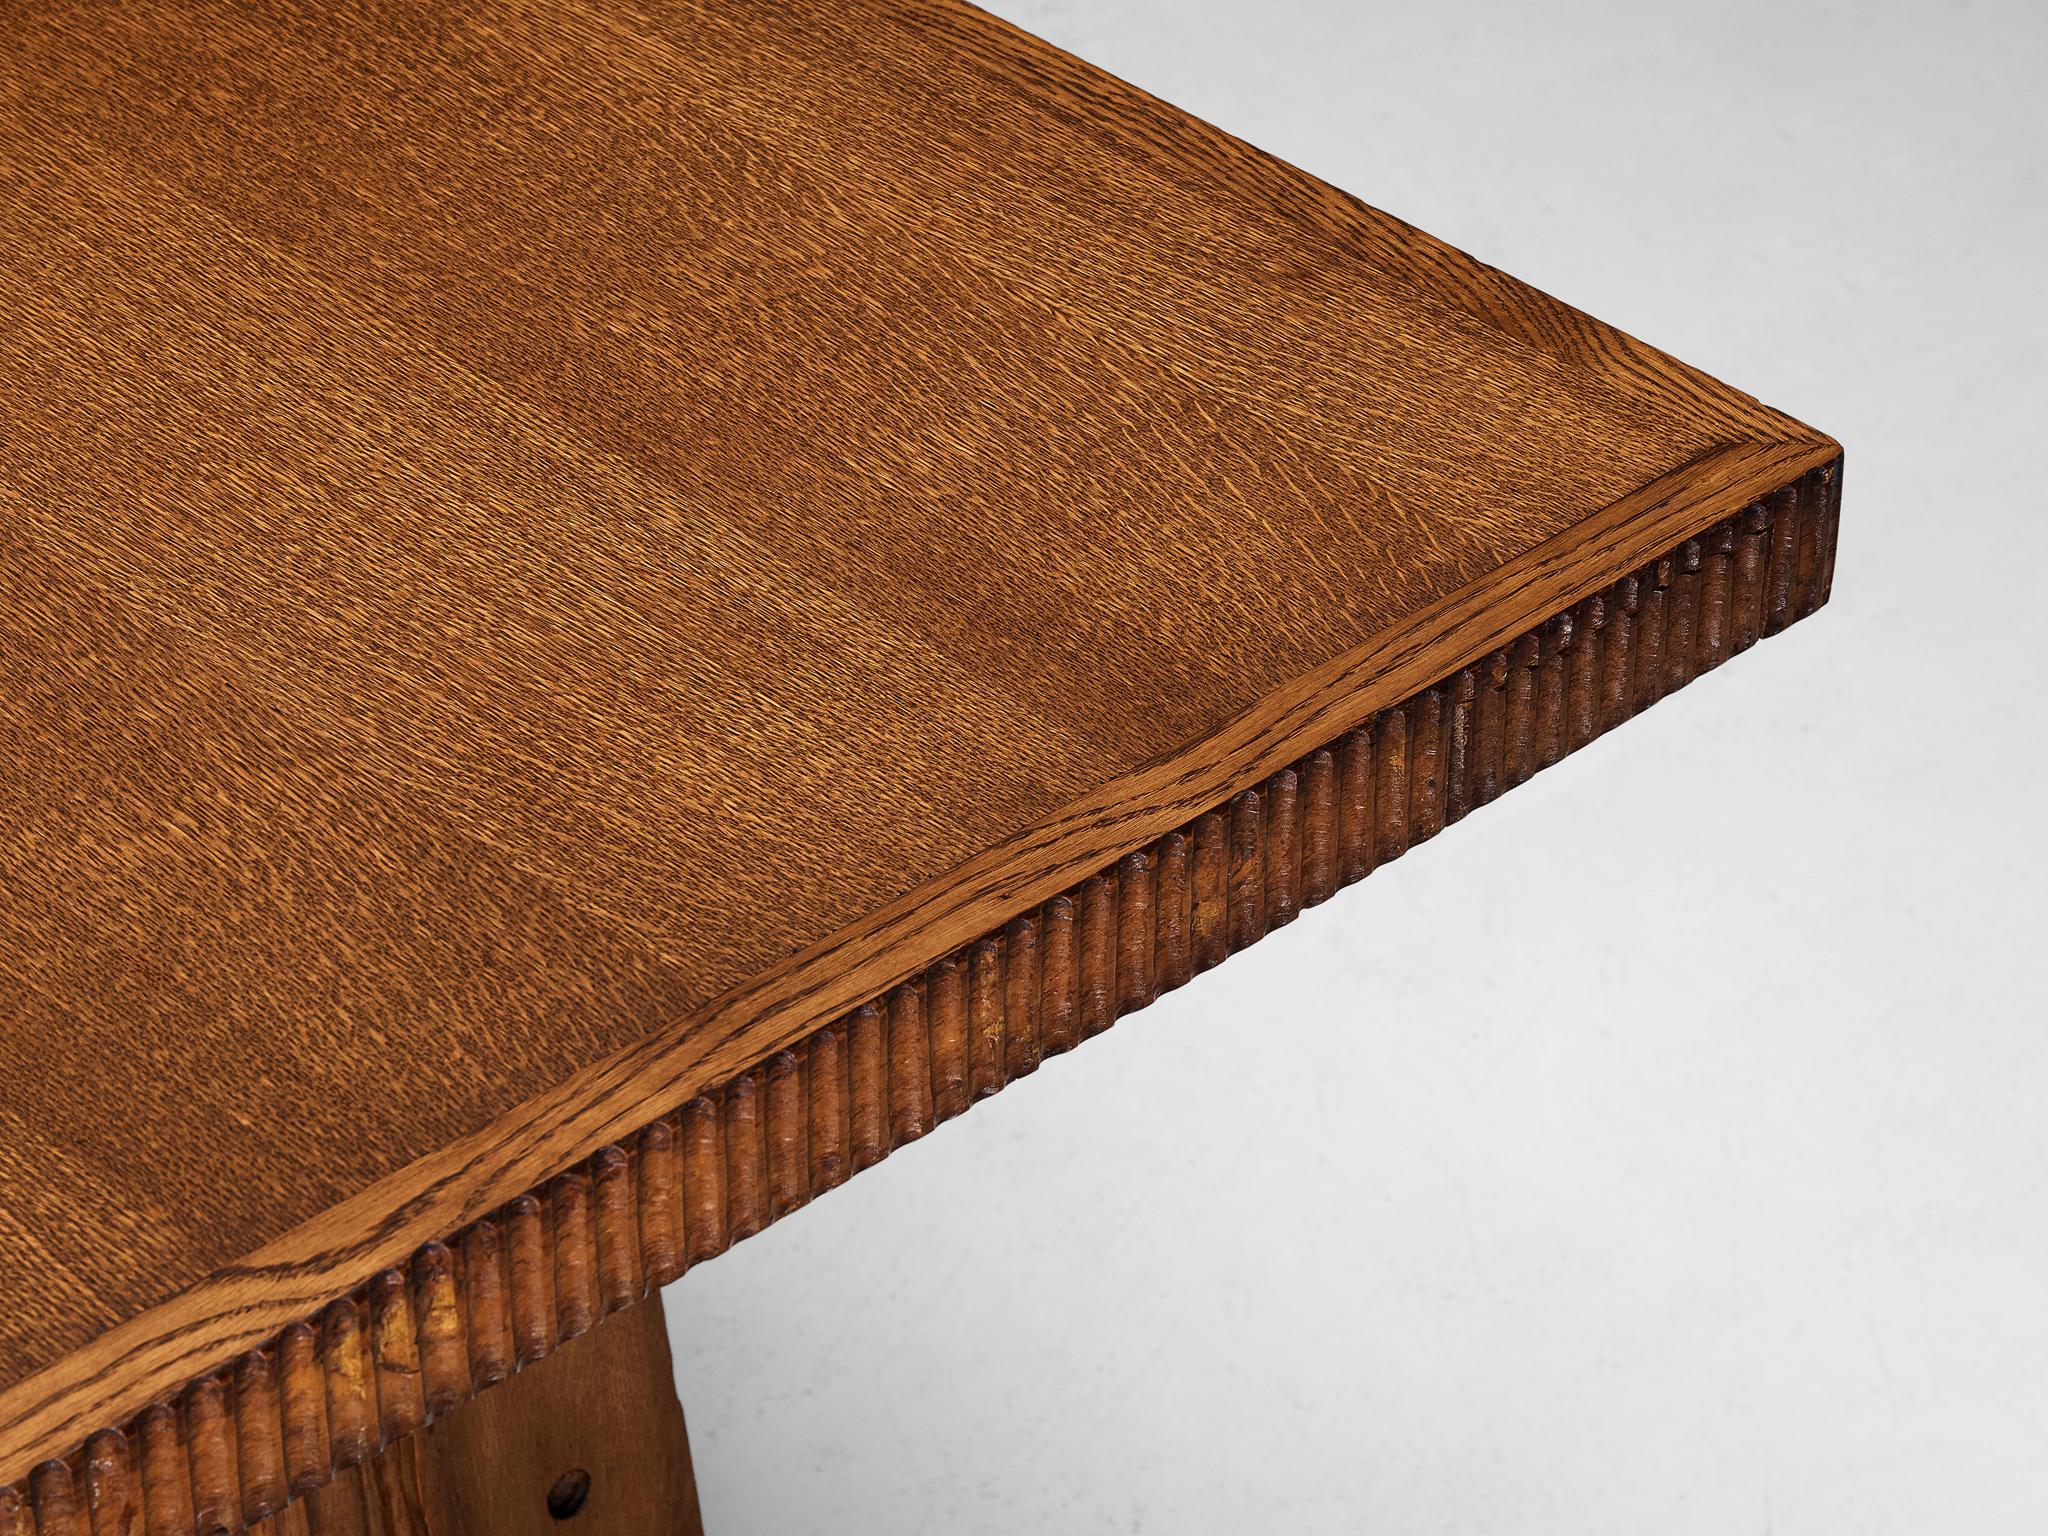 Leather Vittorio Valabrega Dining Table in Oak with Intricate Carvings 